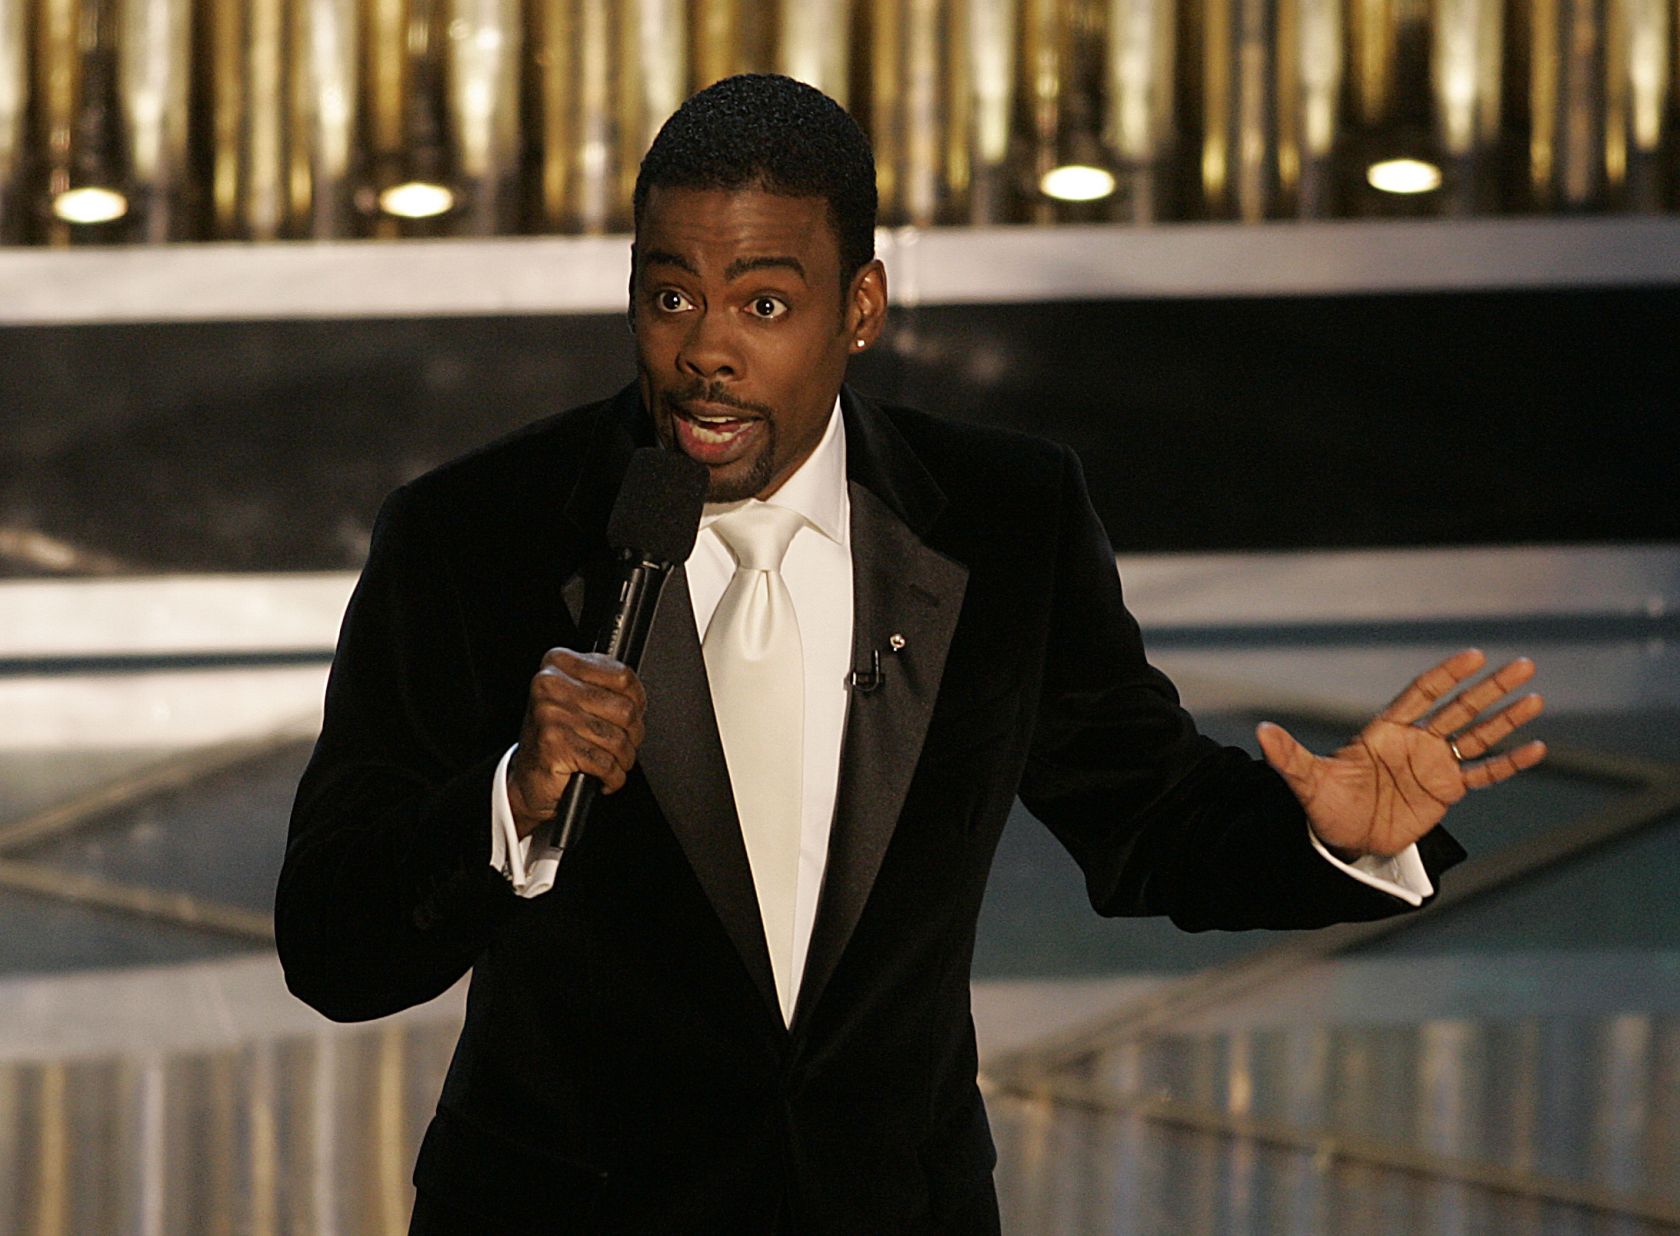 Oscar host Chris Rock during the 77th Annual Academy Awards at the Kodak Theatre in Los Angeles, Ca